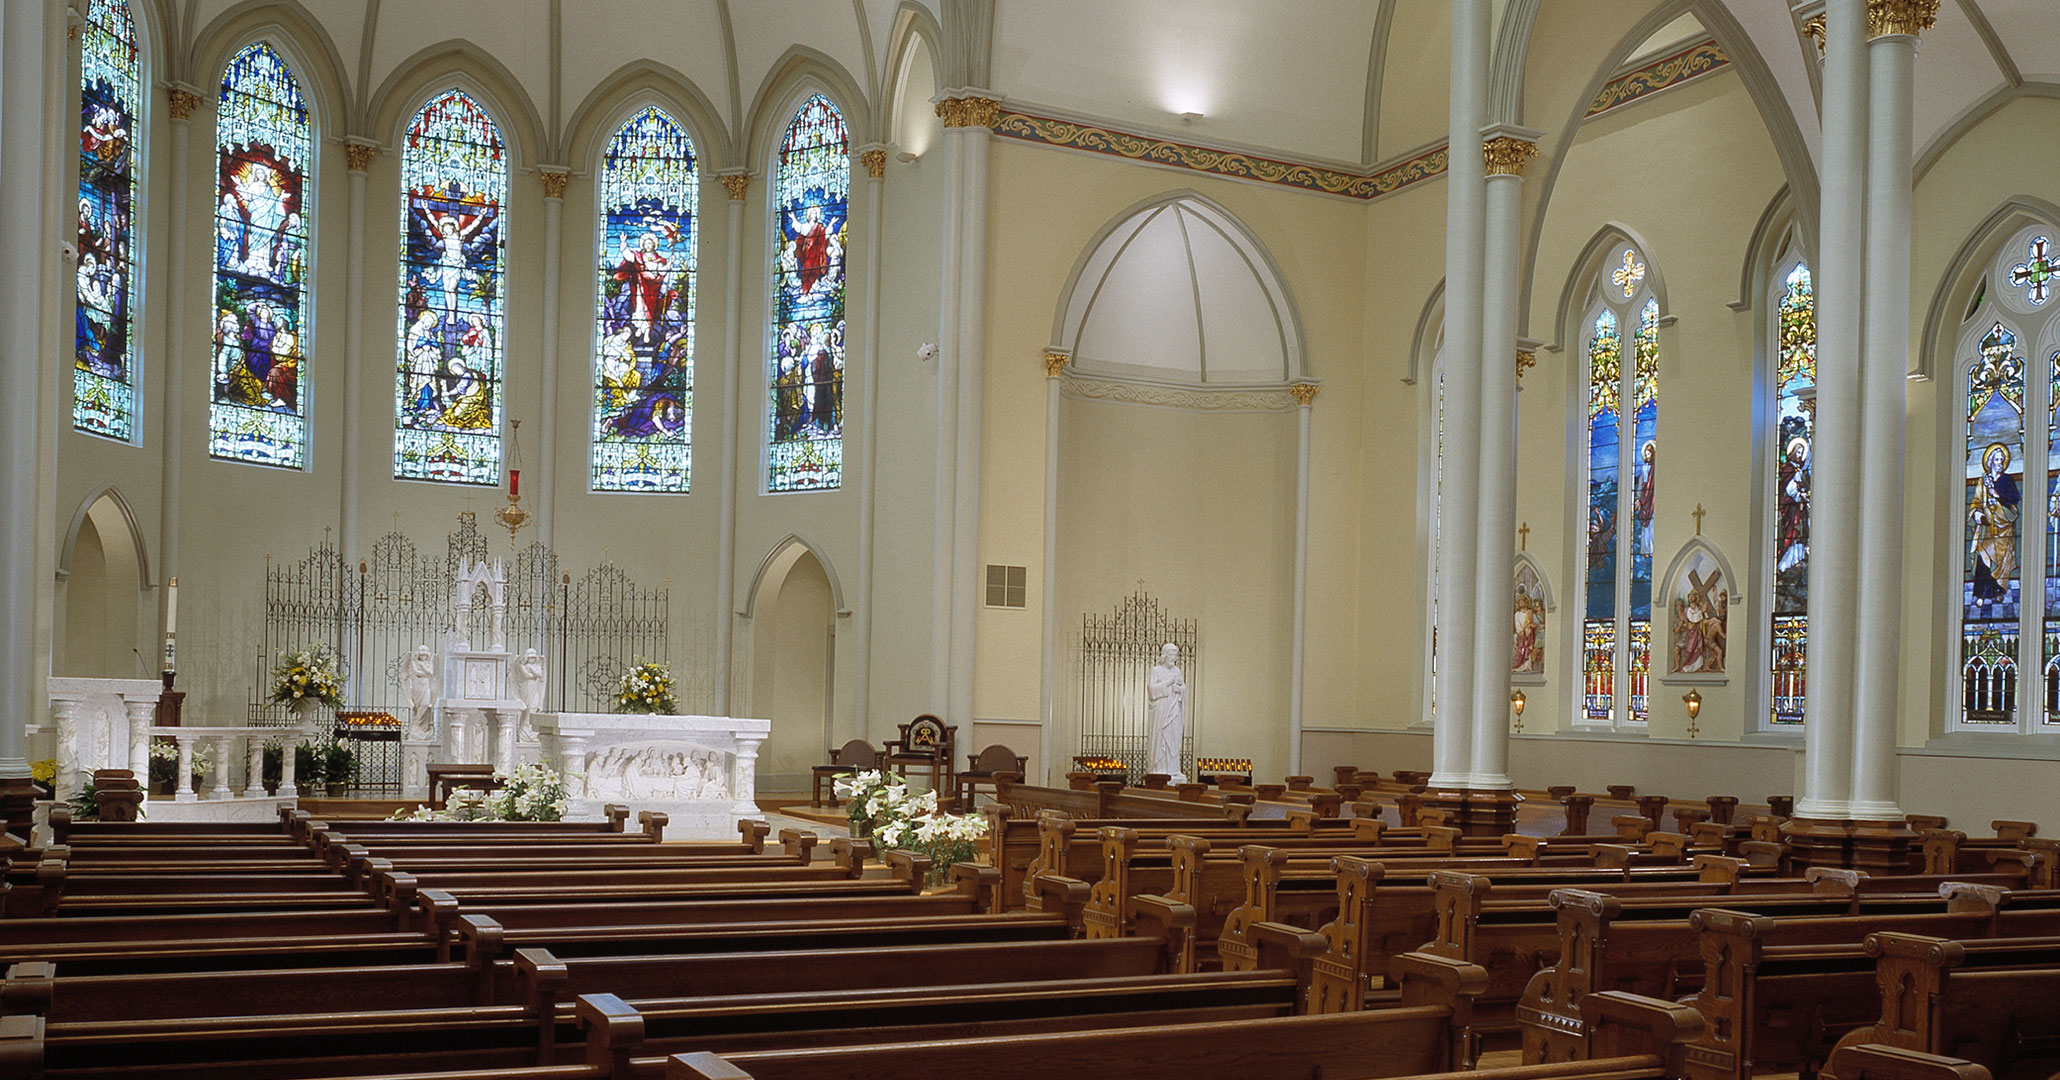 St Peter’s Catholic Church in Columbia, SC worked with Catholic Church specialists at Boudreaux to restore the Basilica.